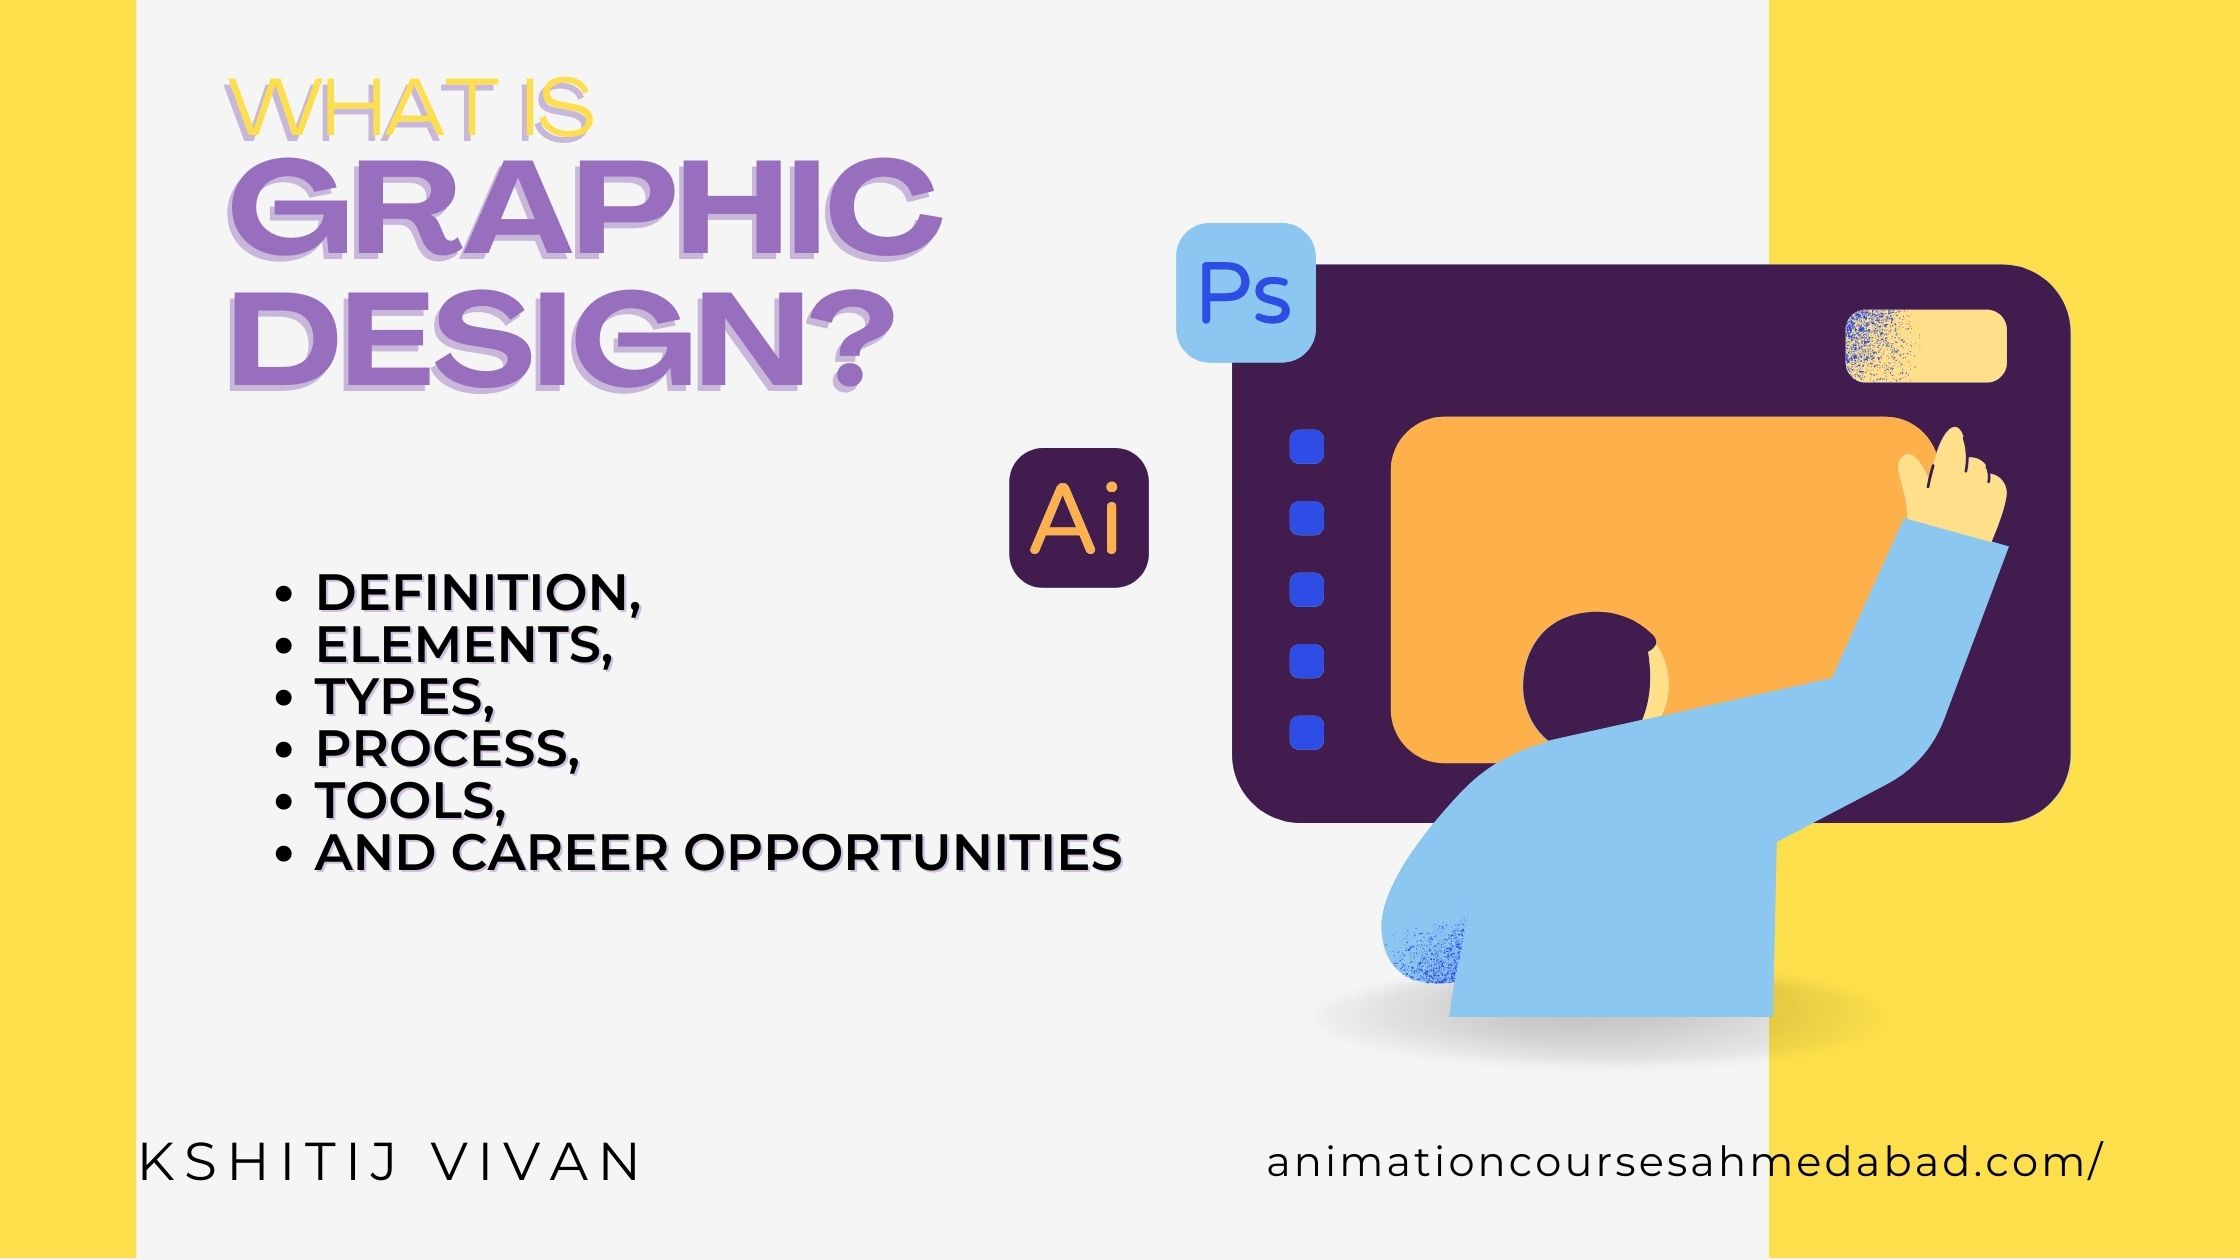 What is Graphic Design: Definition, Elements, Types, Process, Tools, Importance, Role, and Career Opportunities